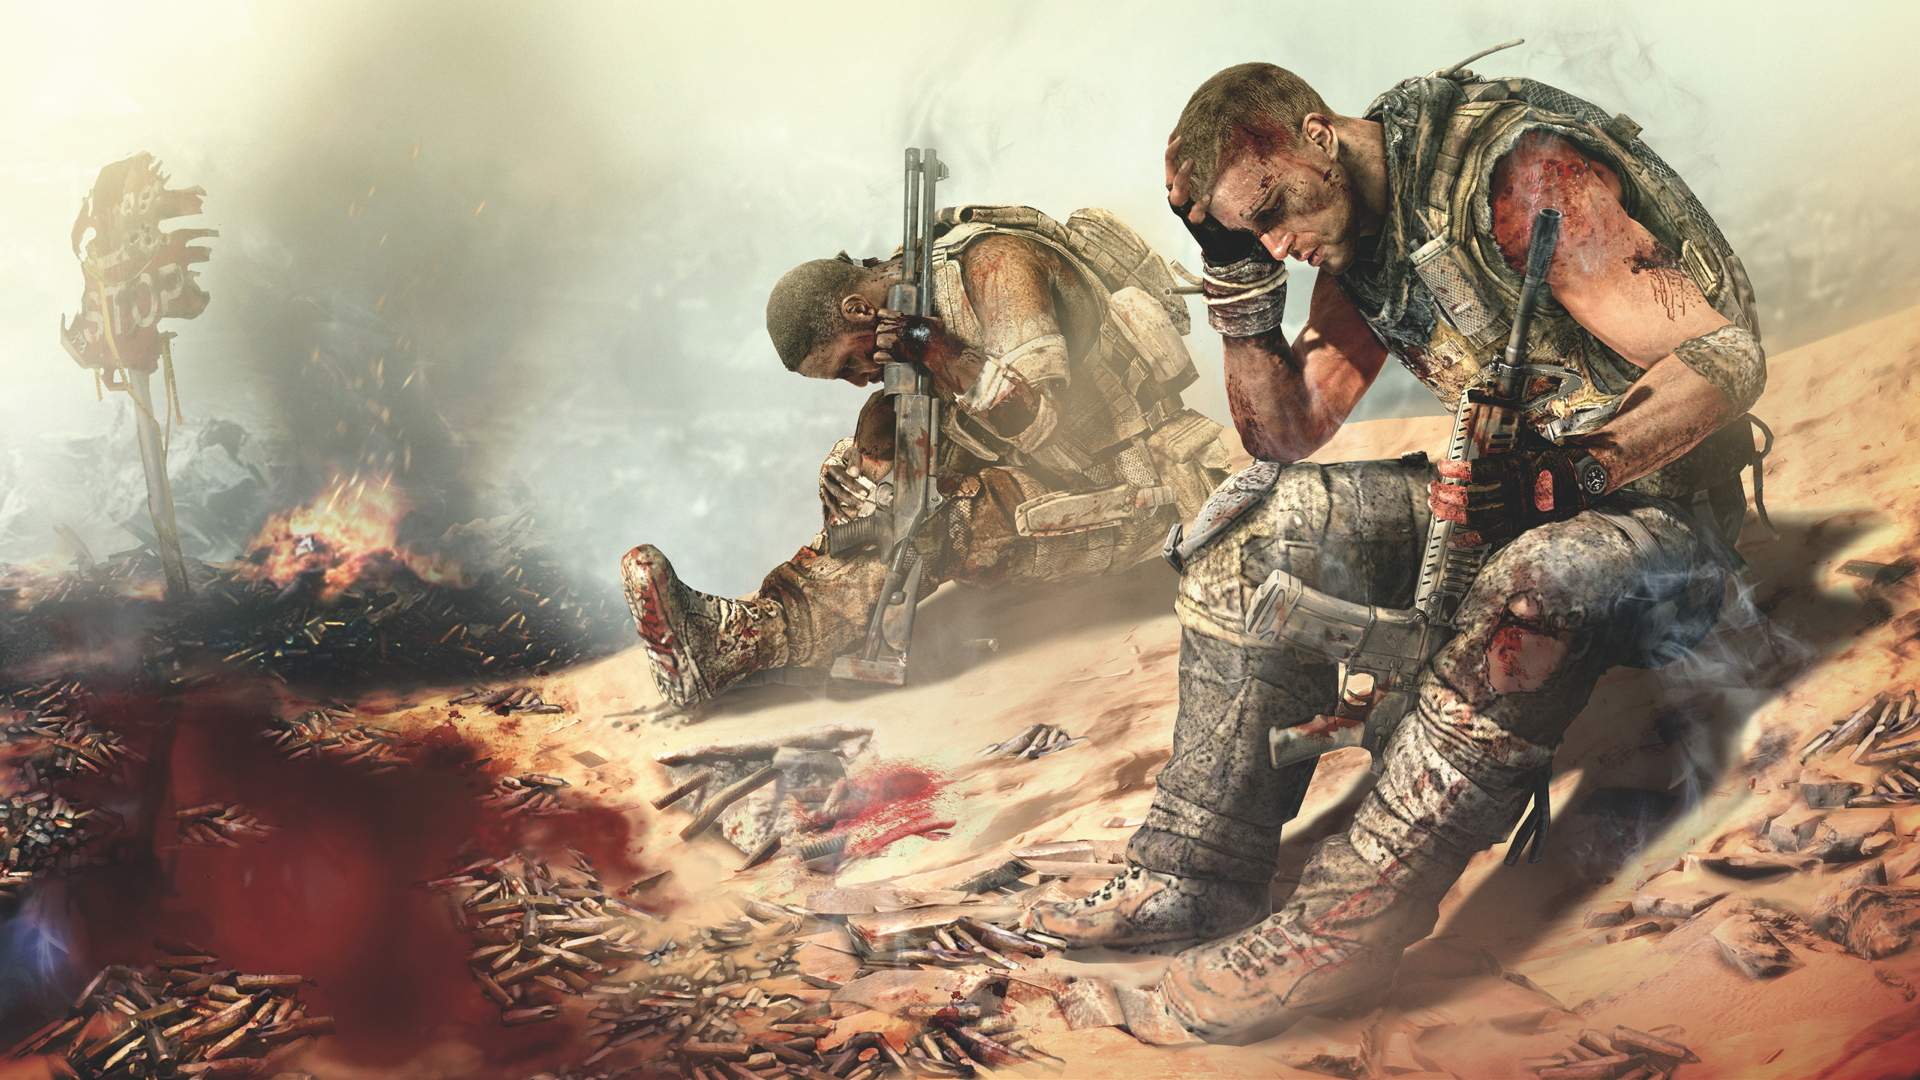 Game: Spec Ops The Line Review